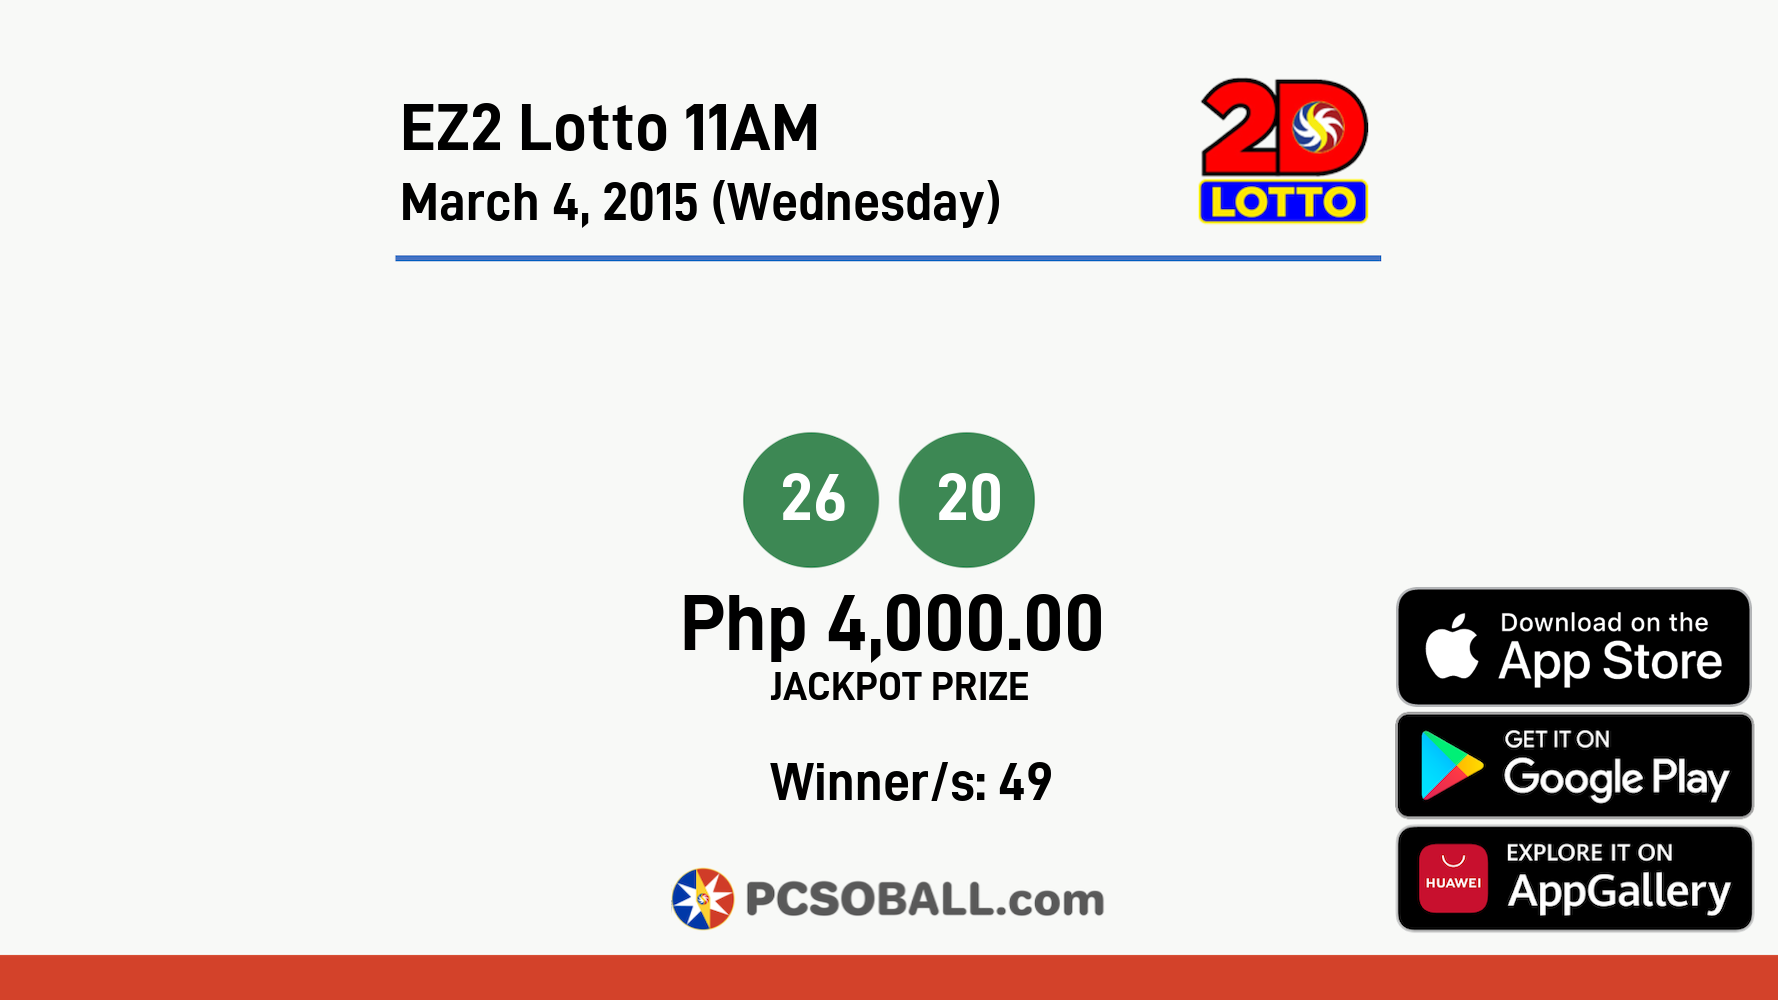 EZ2 Lotto 11AM March 4, 2015 (Wednesday) Result